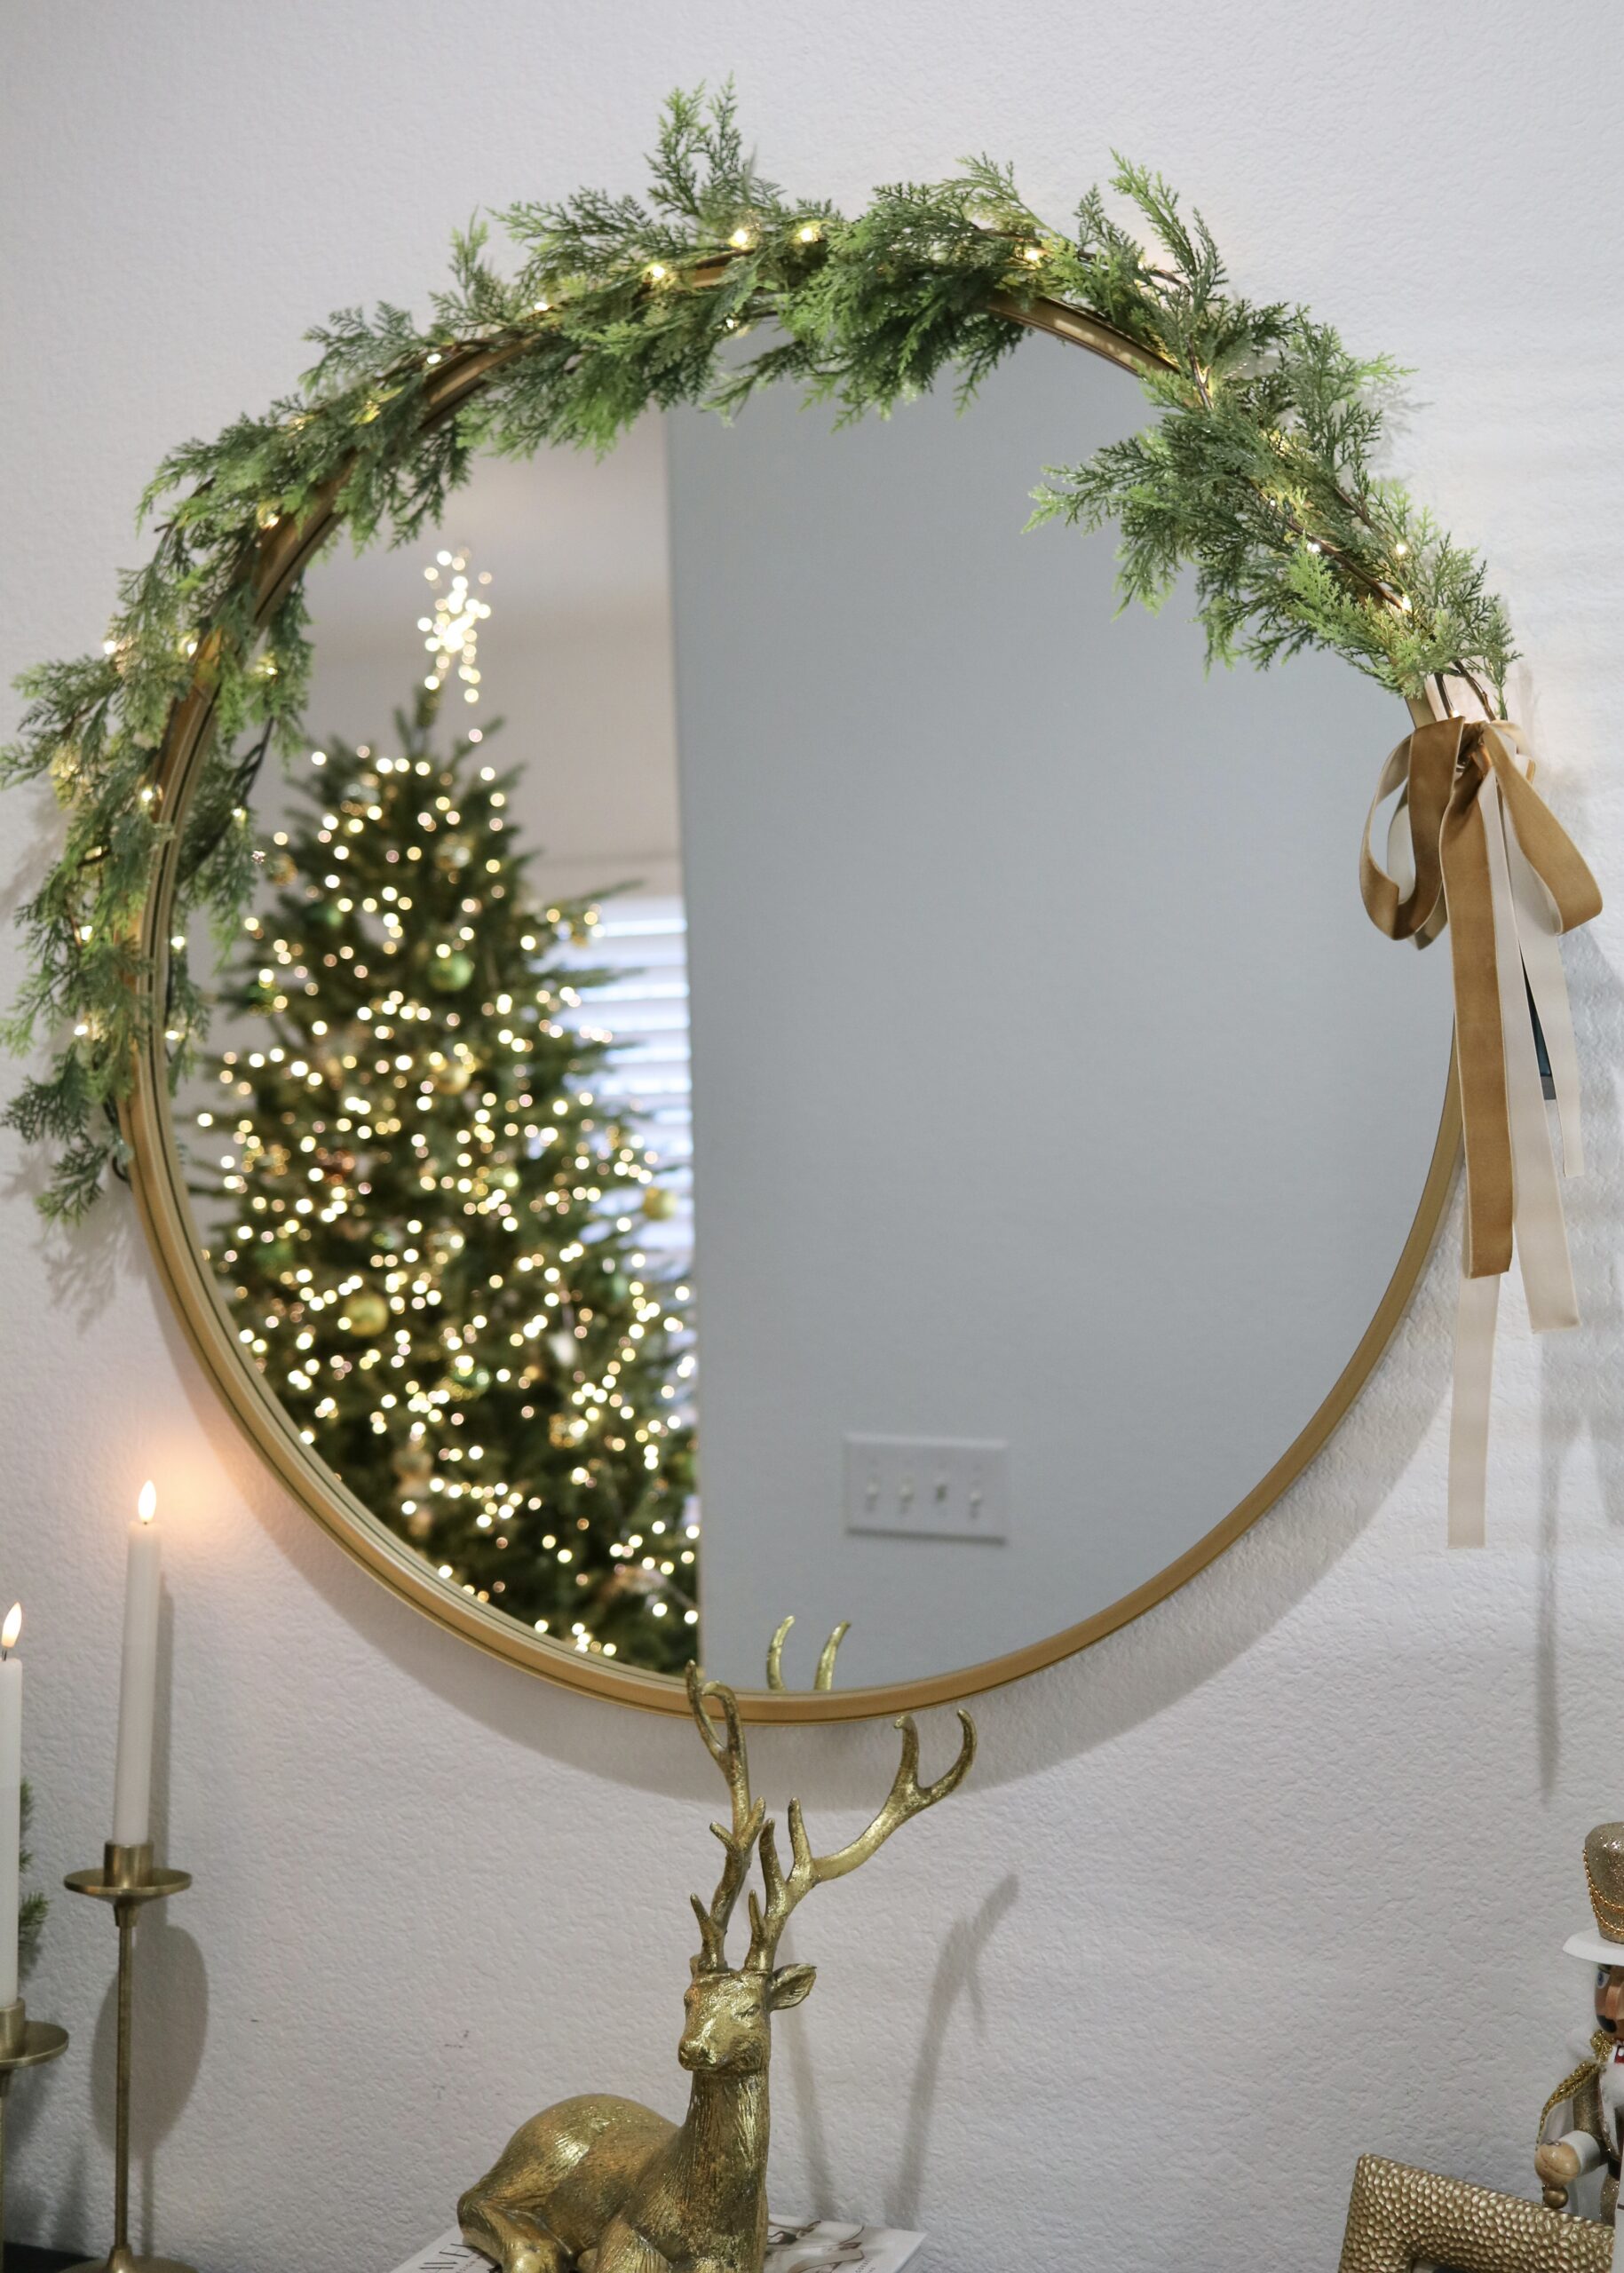 layered garlands on circle mirror, gold and warm lights Christmas decorations